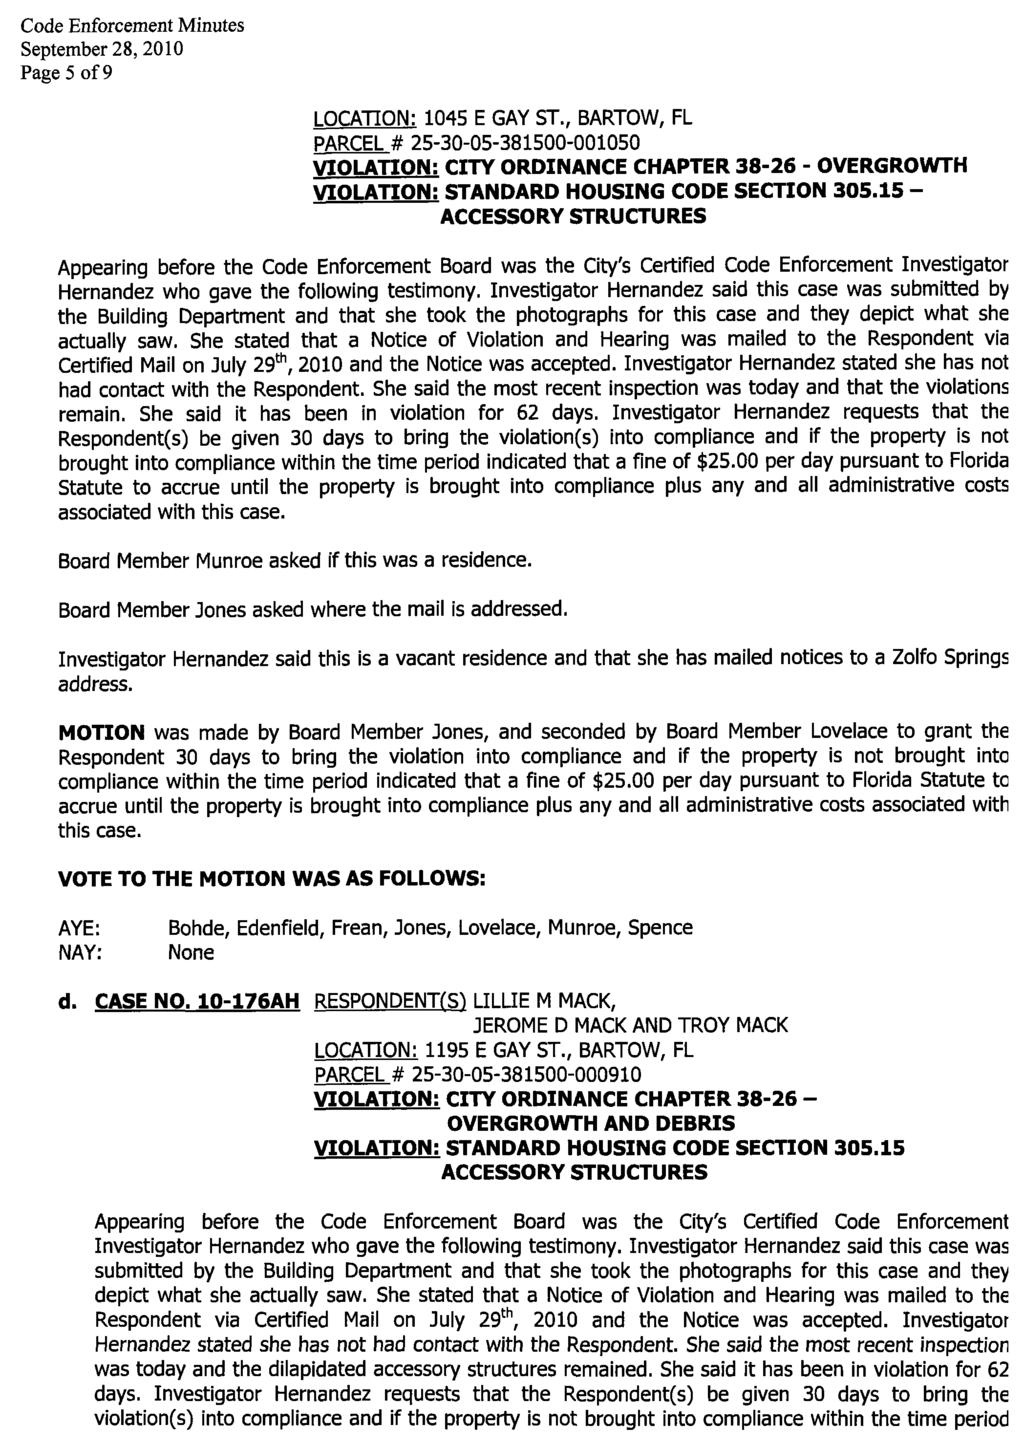 Page 5 of 9 LOCATION 1045 E GAY ST BARTOW FL PARCEL 253005381500 001050 VIOLATION CITY ORDINANCE CHAPTER 3826 OVERGROWTH VIOLATION STANDARD HOUSING CODE SECTION 305 15 ACCESSORY STRUCTURES